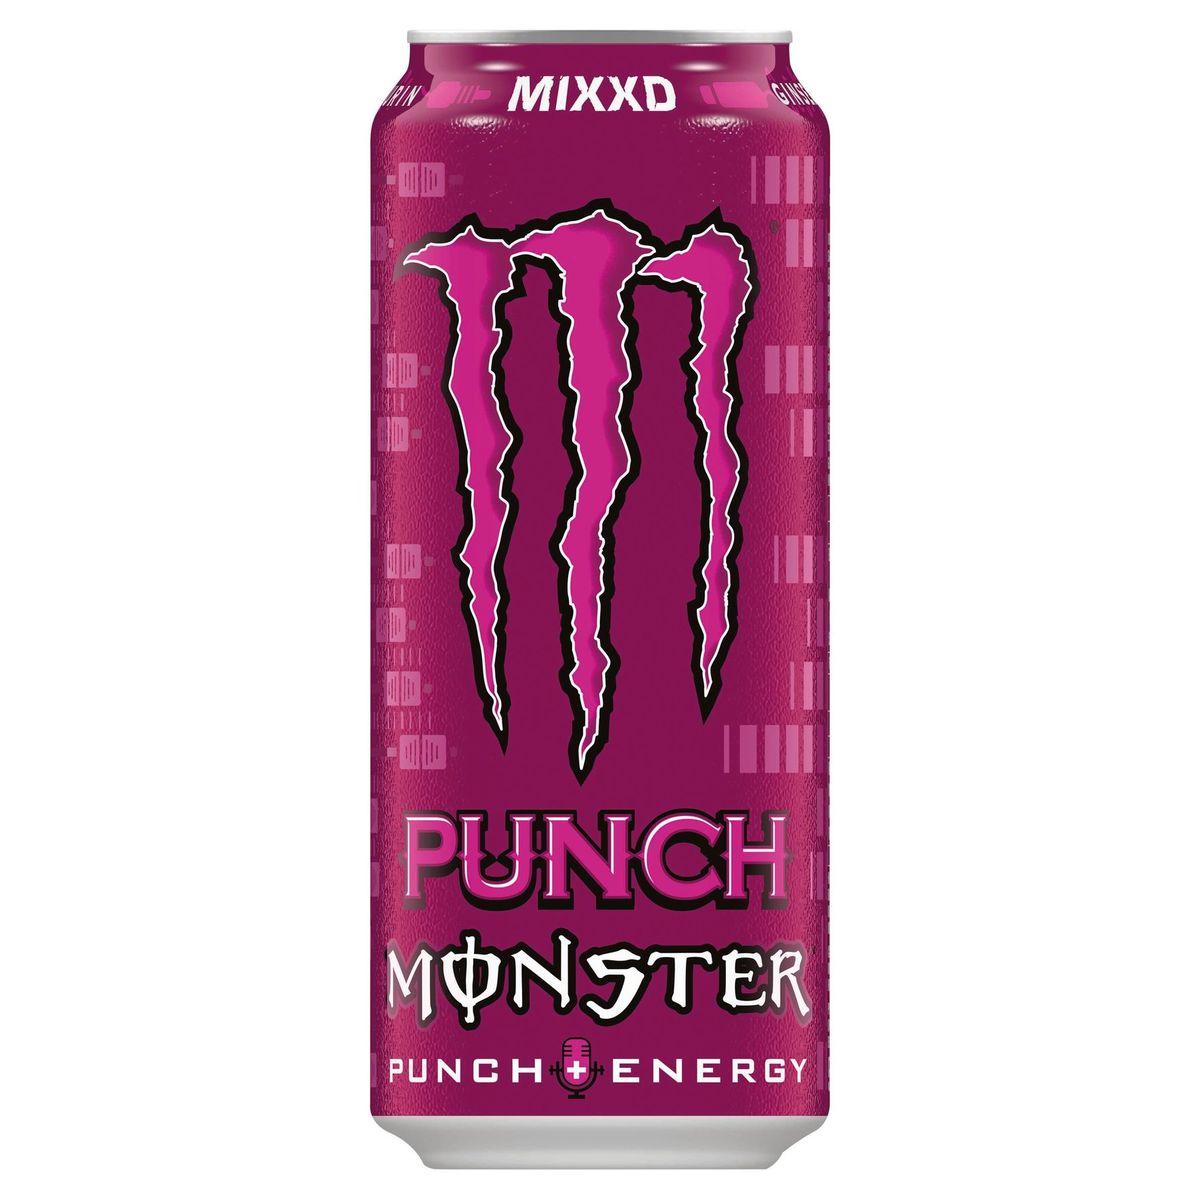 Monster Energy MIXXD Punch + Energy Drink 500 ml